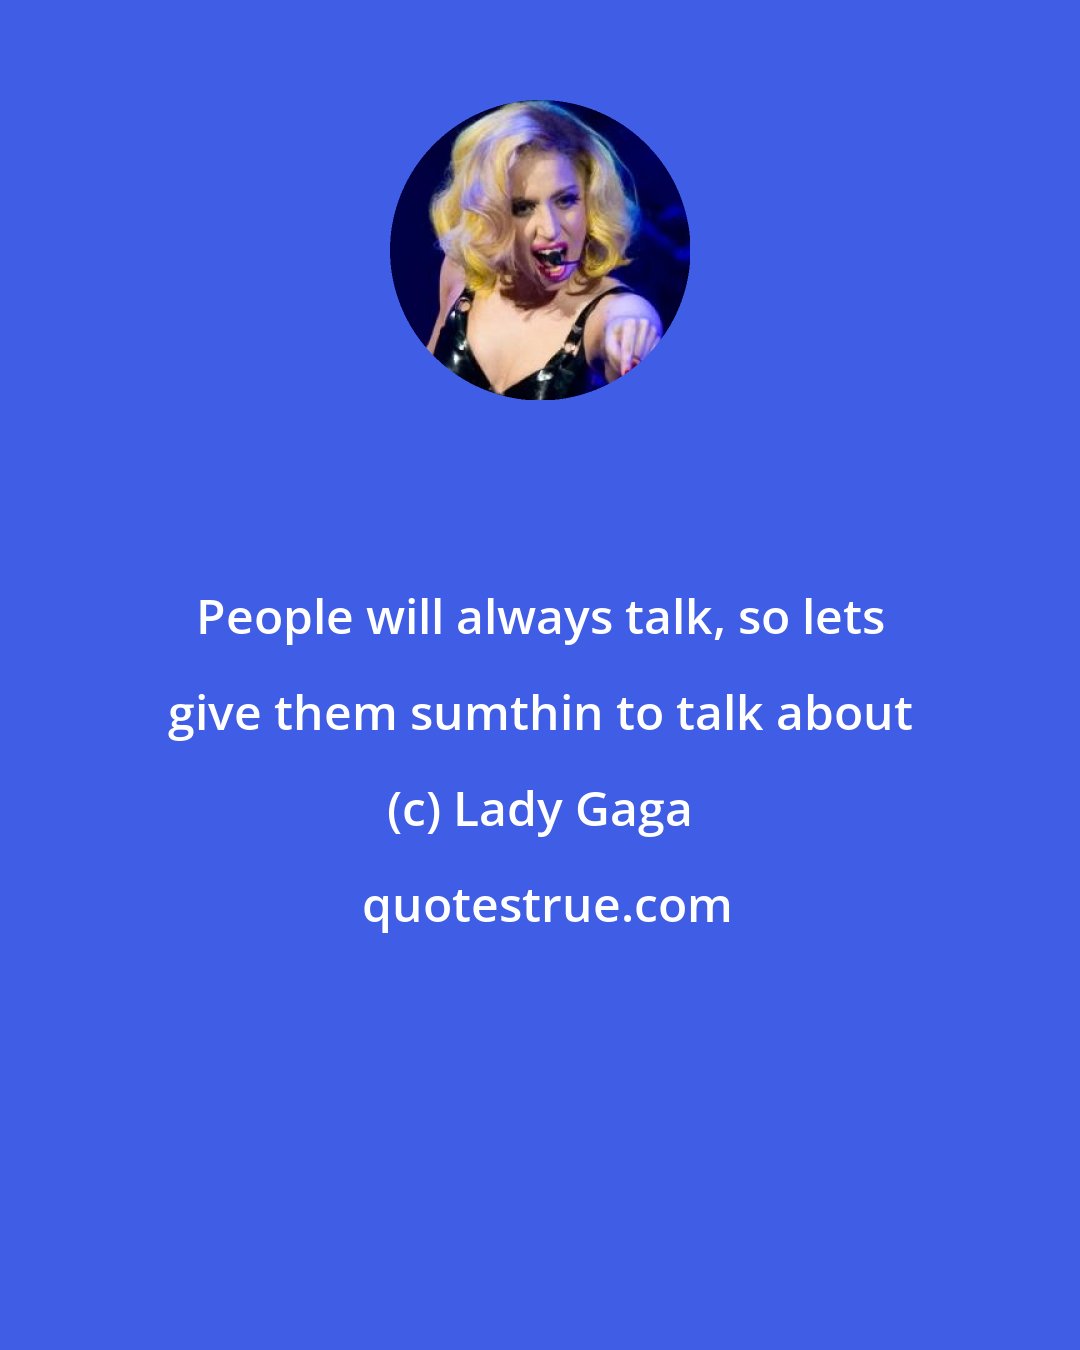 Lady Gaga: People will always talk, so lets give them sumthin to talk about